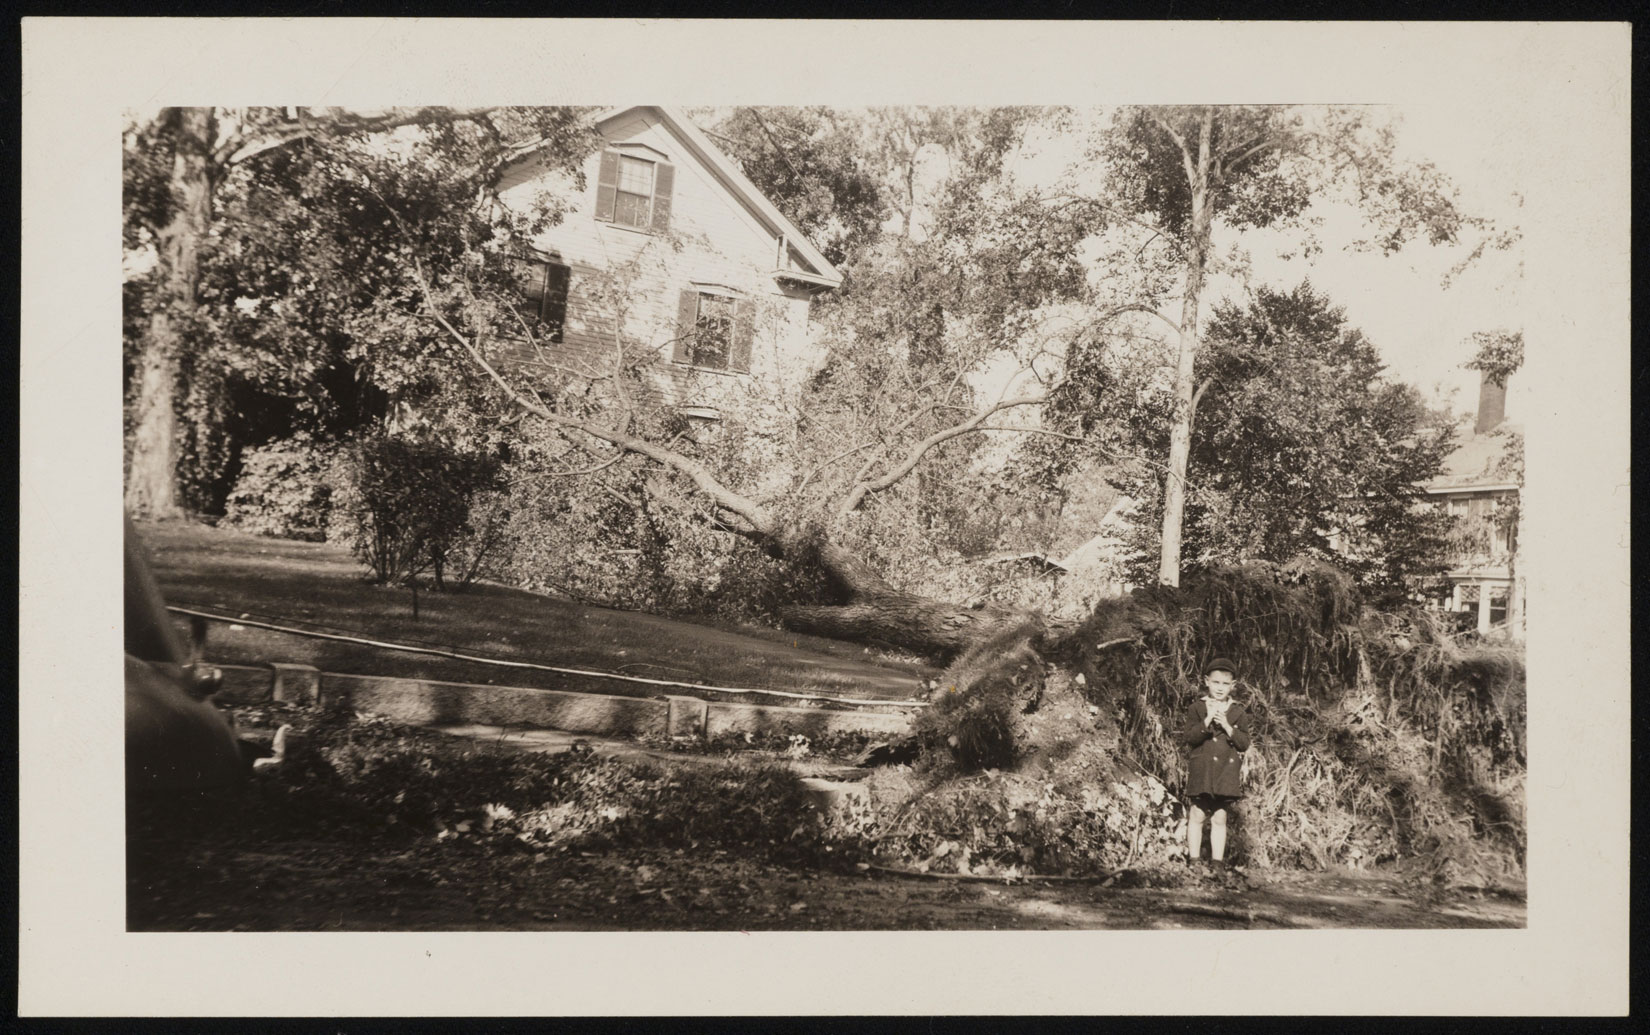 In a black and white photograph, a suburban house with large lawn is seen. In front of the house, a large tree has uprooted and fallen towards the house, hitting it in some places. A small child in shorts and jacket stands next to the roots of the tree, looking at the viewer. 